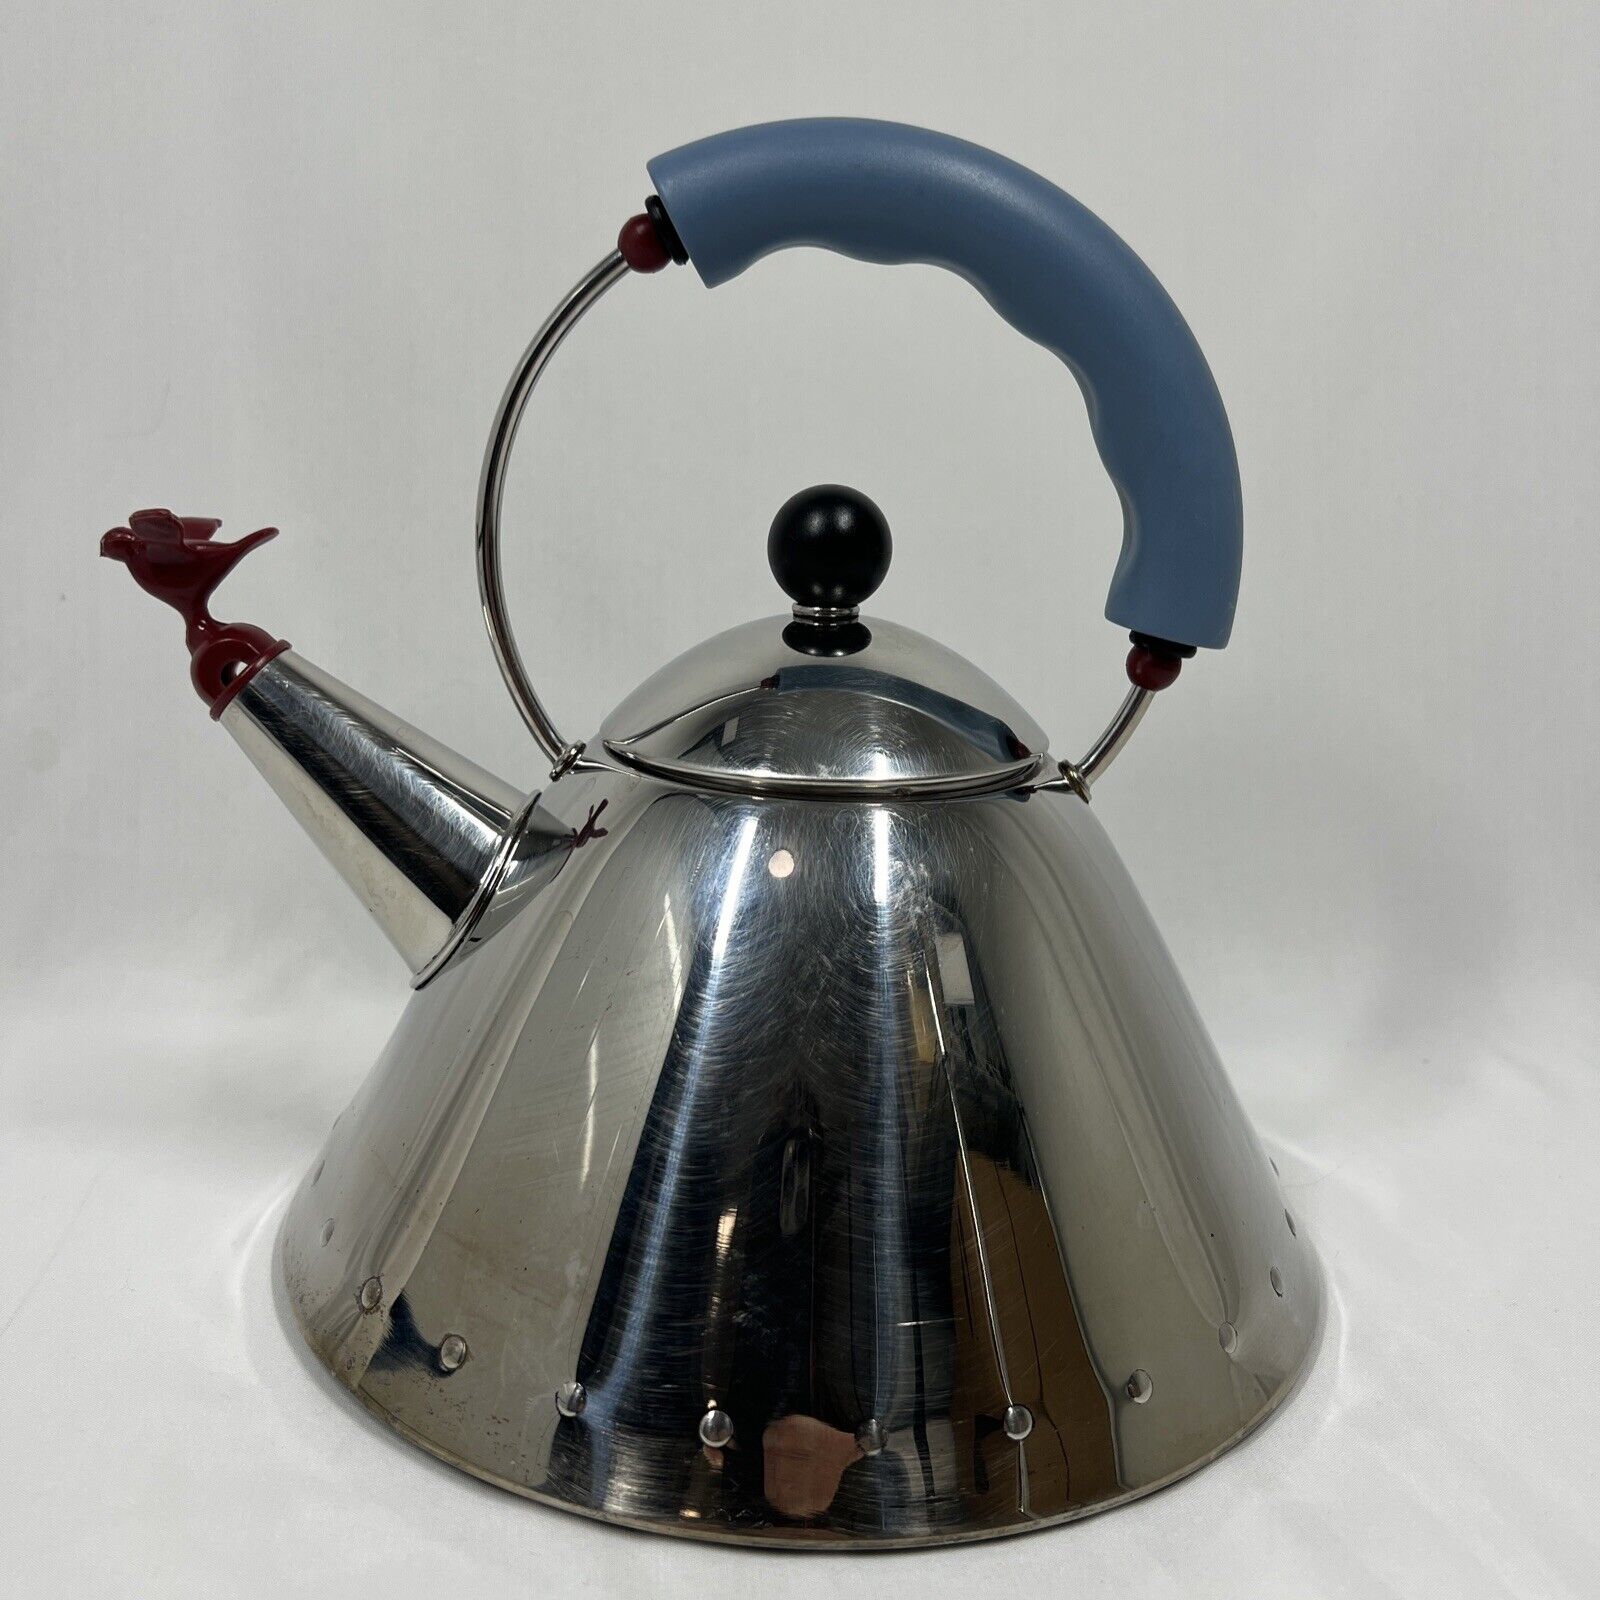 VTG Alessi Tea Kettle Made In Italy W/Bird Whistle Flat Bottom Stainless Steel